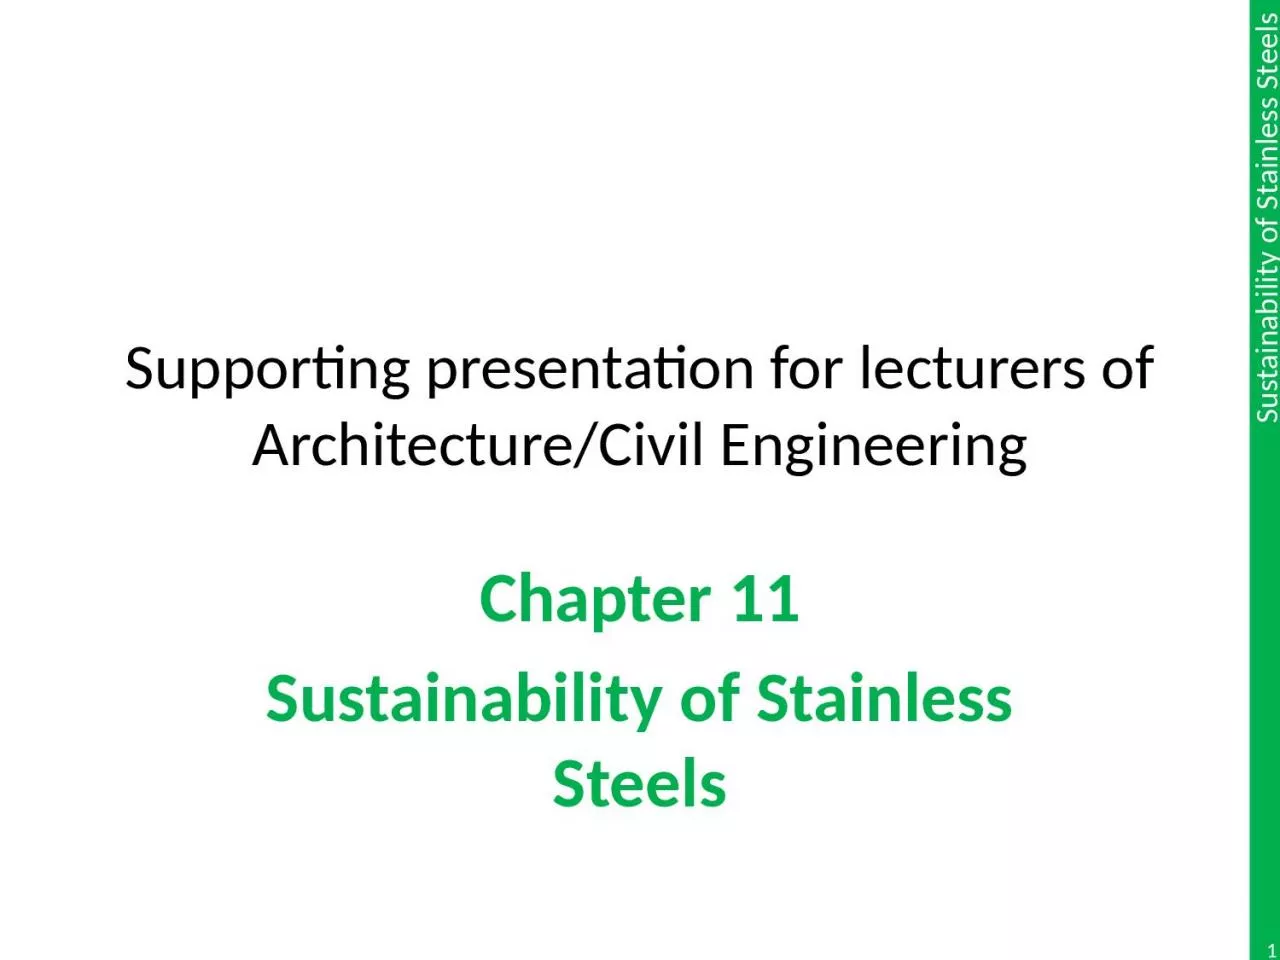 Supporting presentation for lecturers of Architecture/Civil Engineering